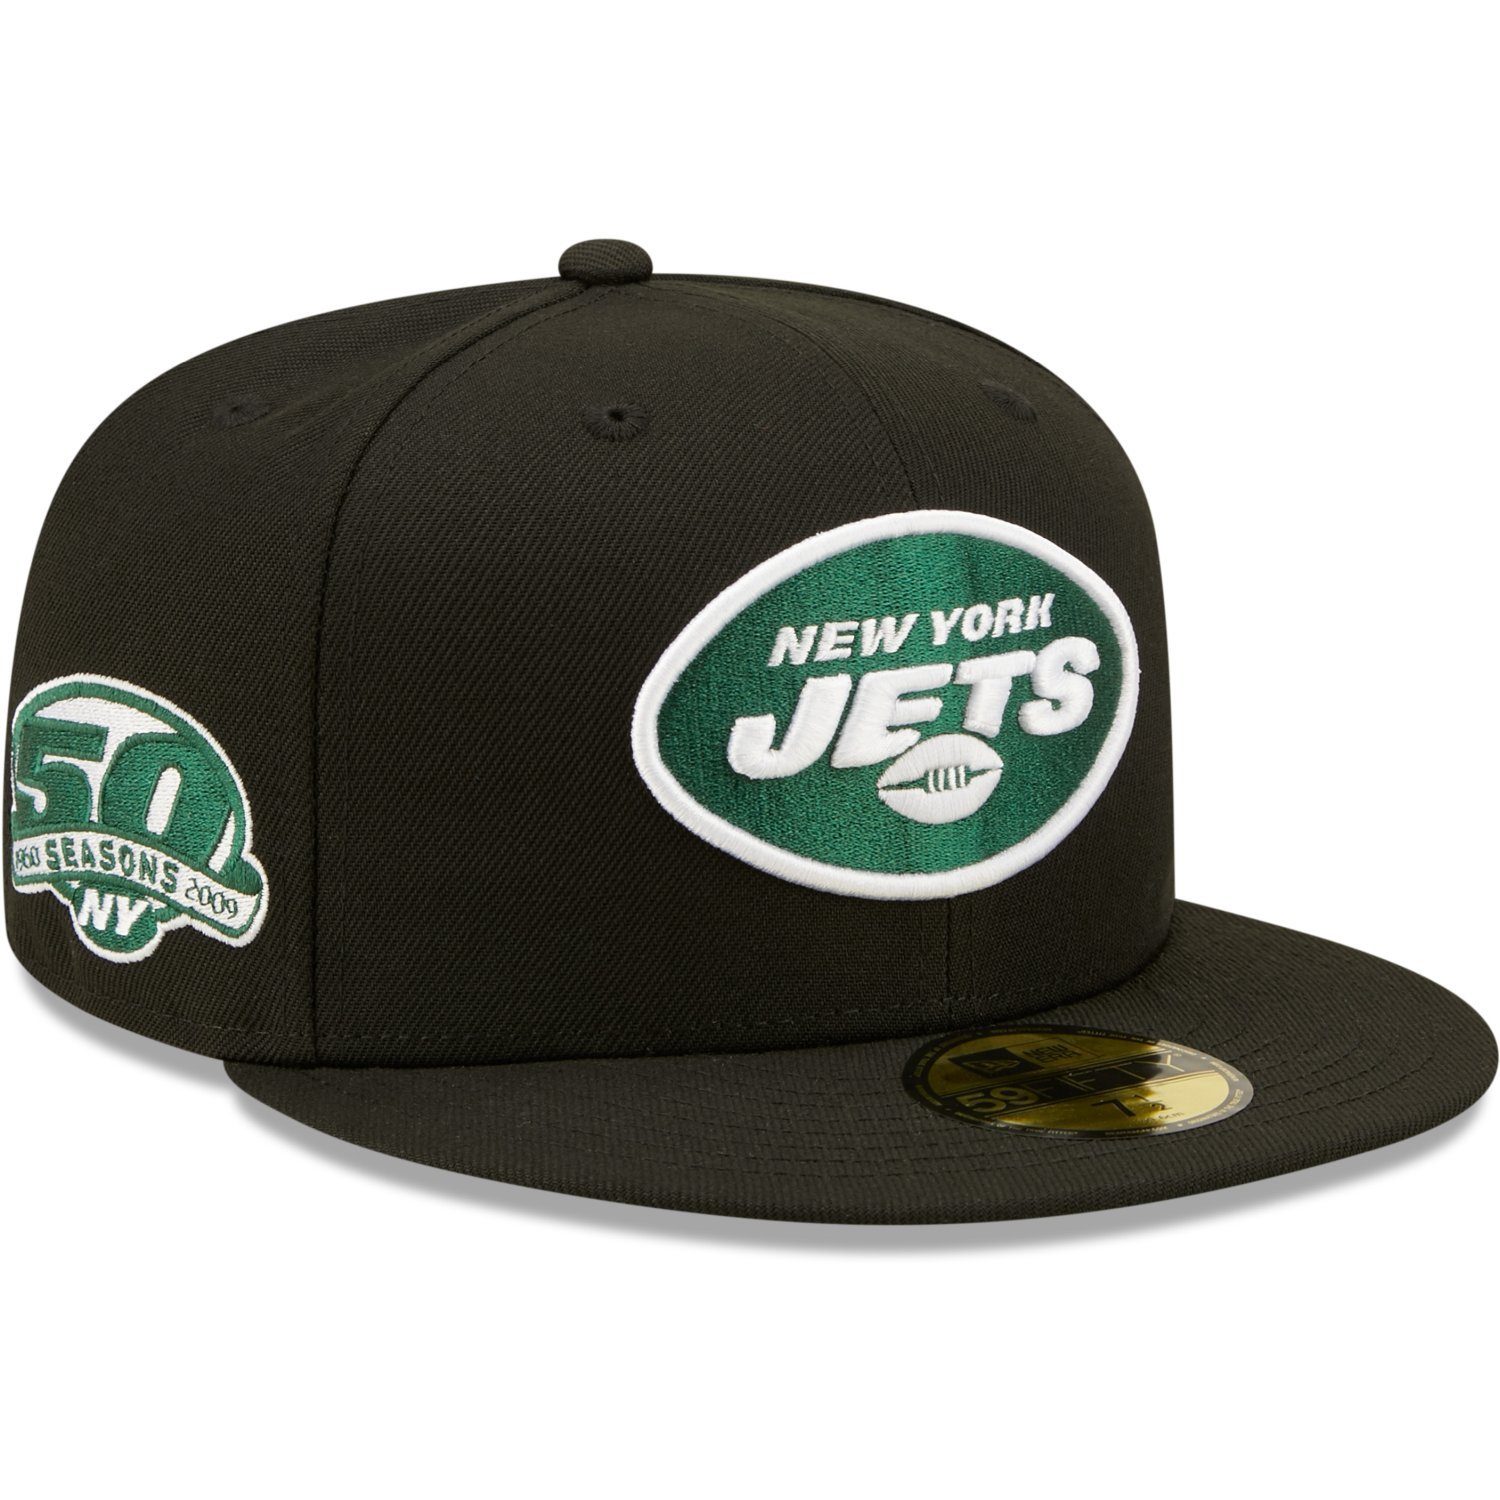 59Fifty Era 50 Seasons New Fitted New York Cap Jets